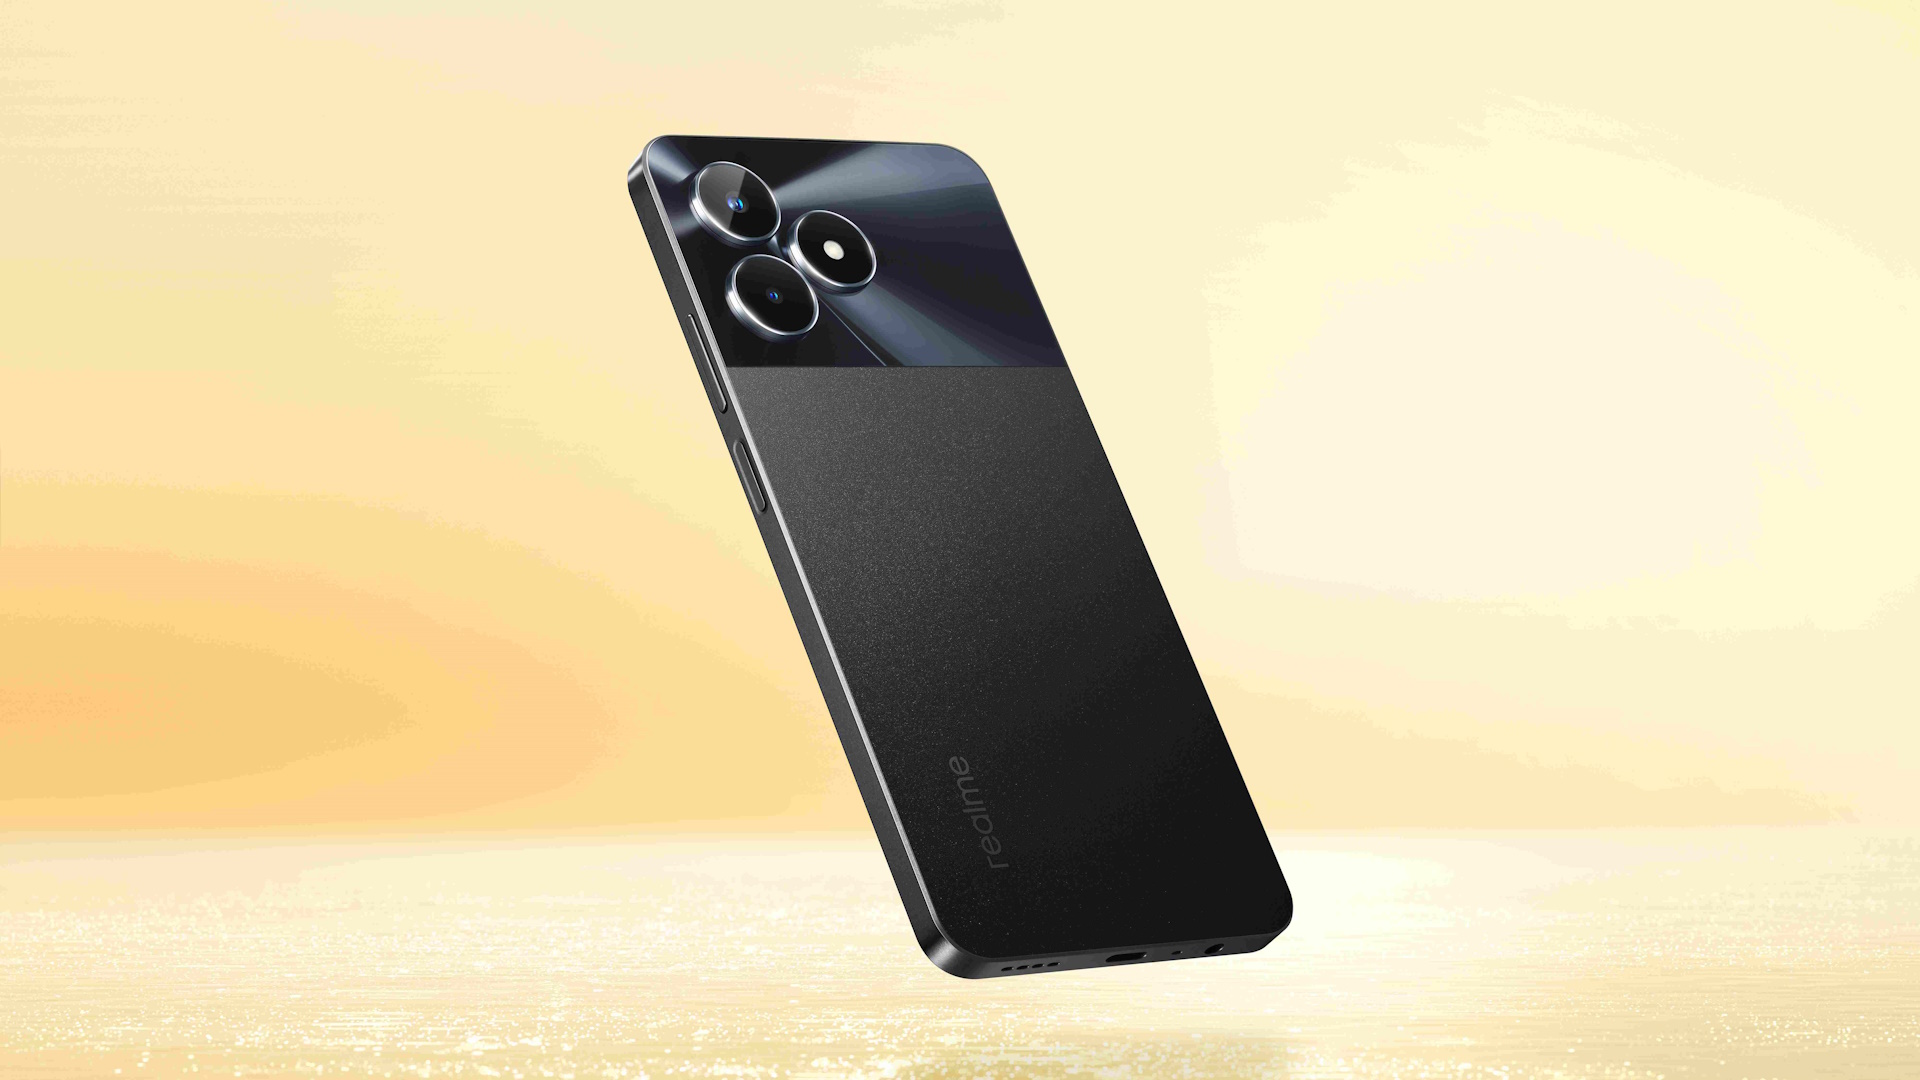 Realme C51 arrives on September 20: 128 GB memory, 33 W fast charging and 50 MP camera